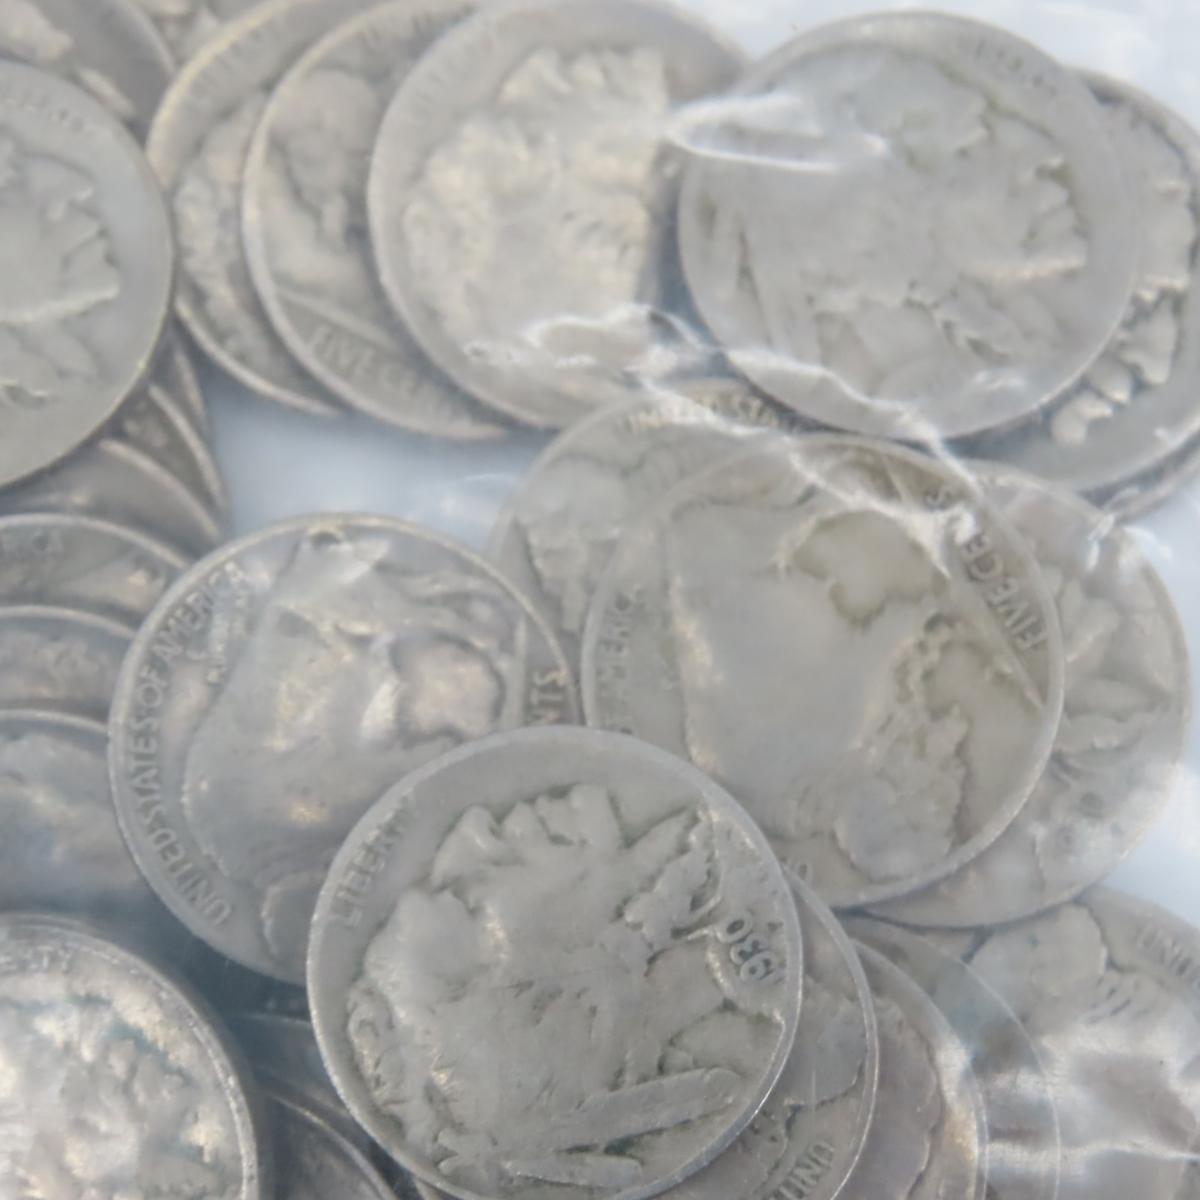 1 pound of Buffalo Nickels, most are 1930's